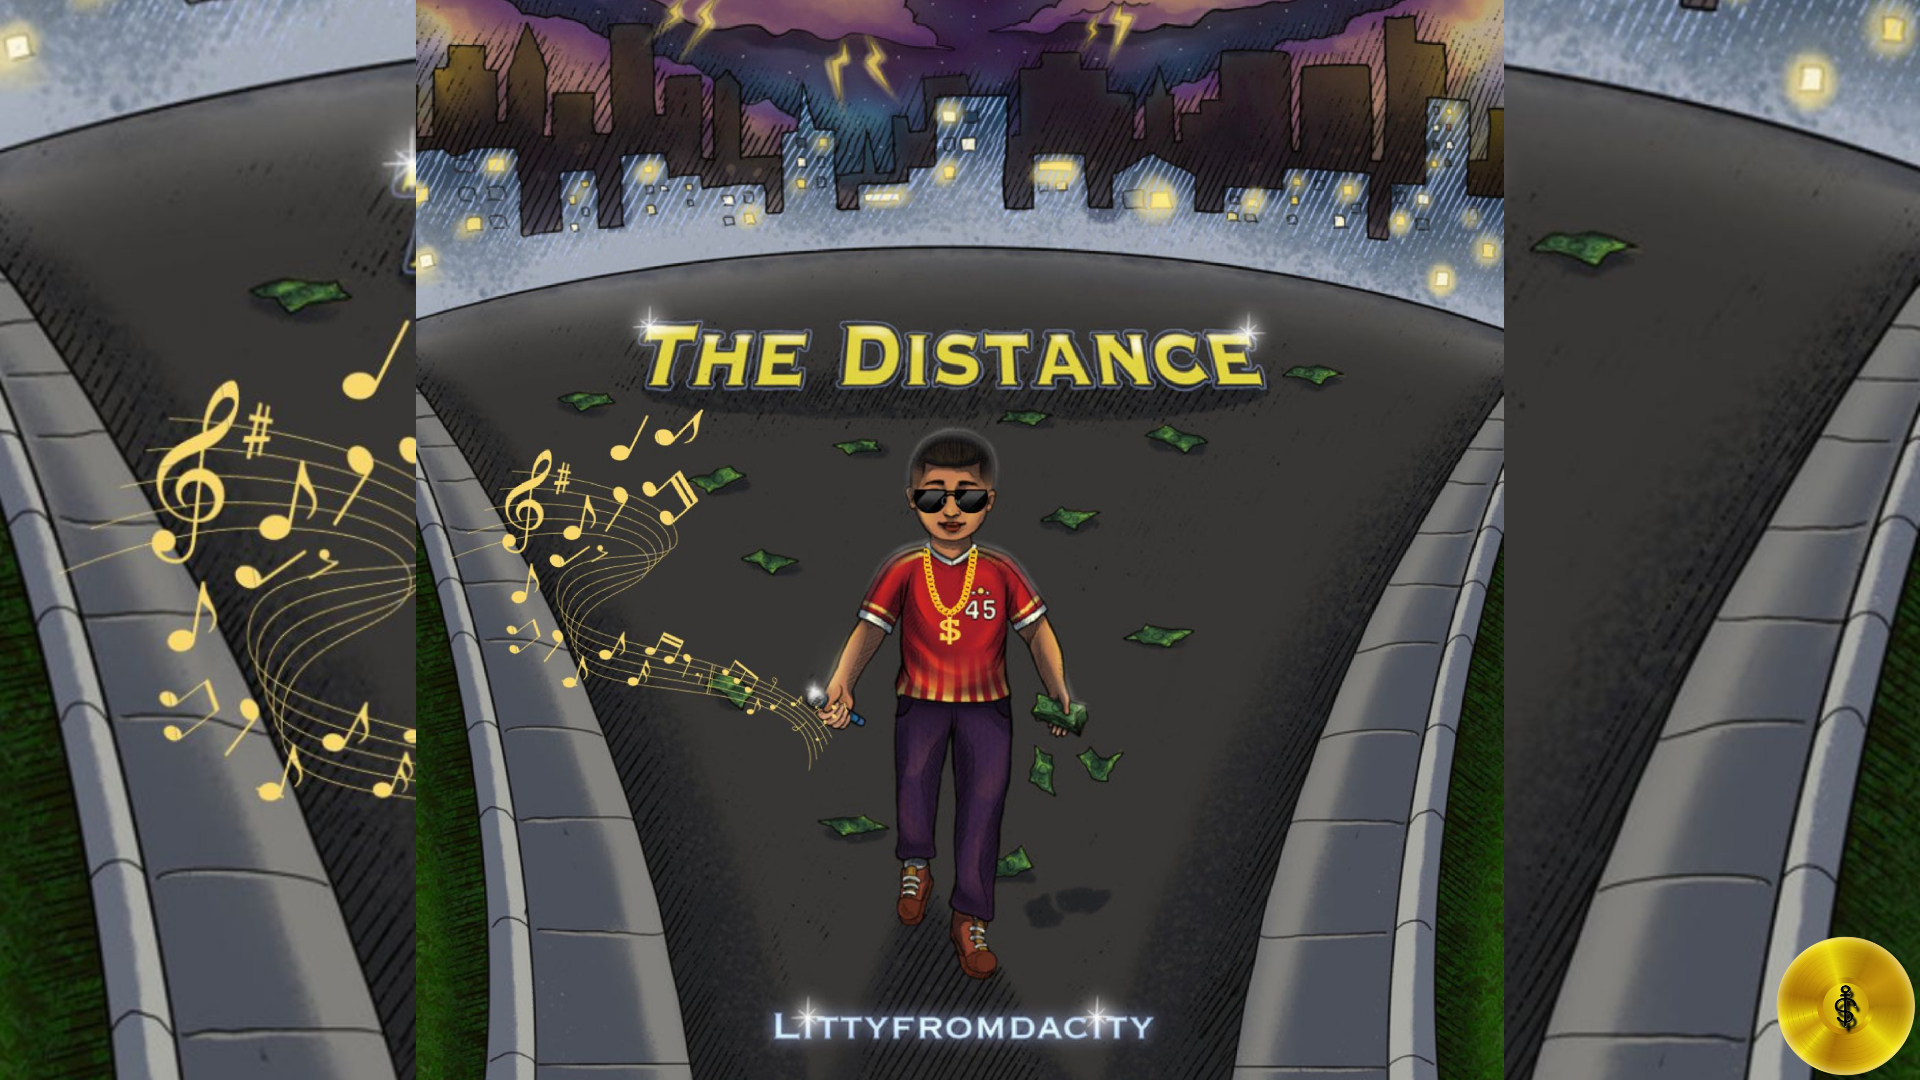 Littyfromdacity goes, and shows ‘The Distance’